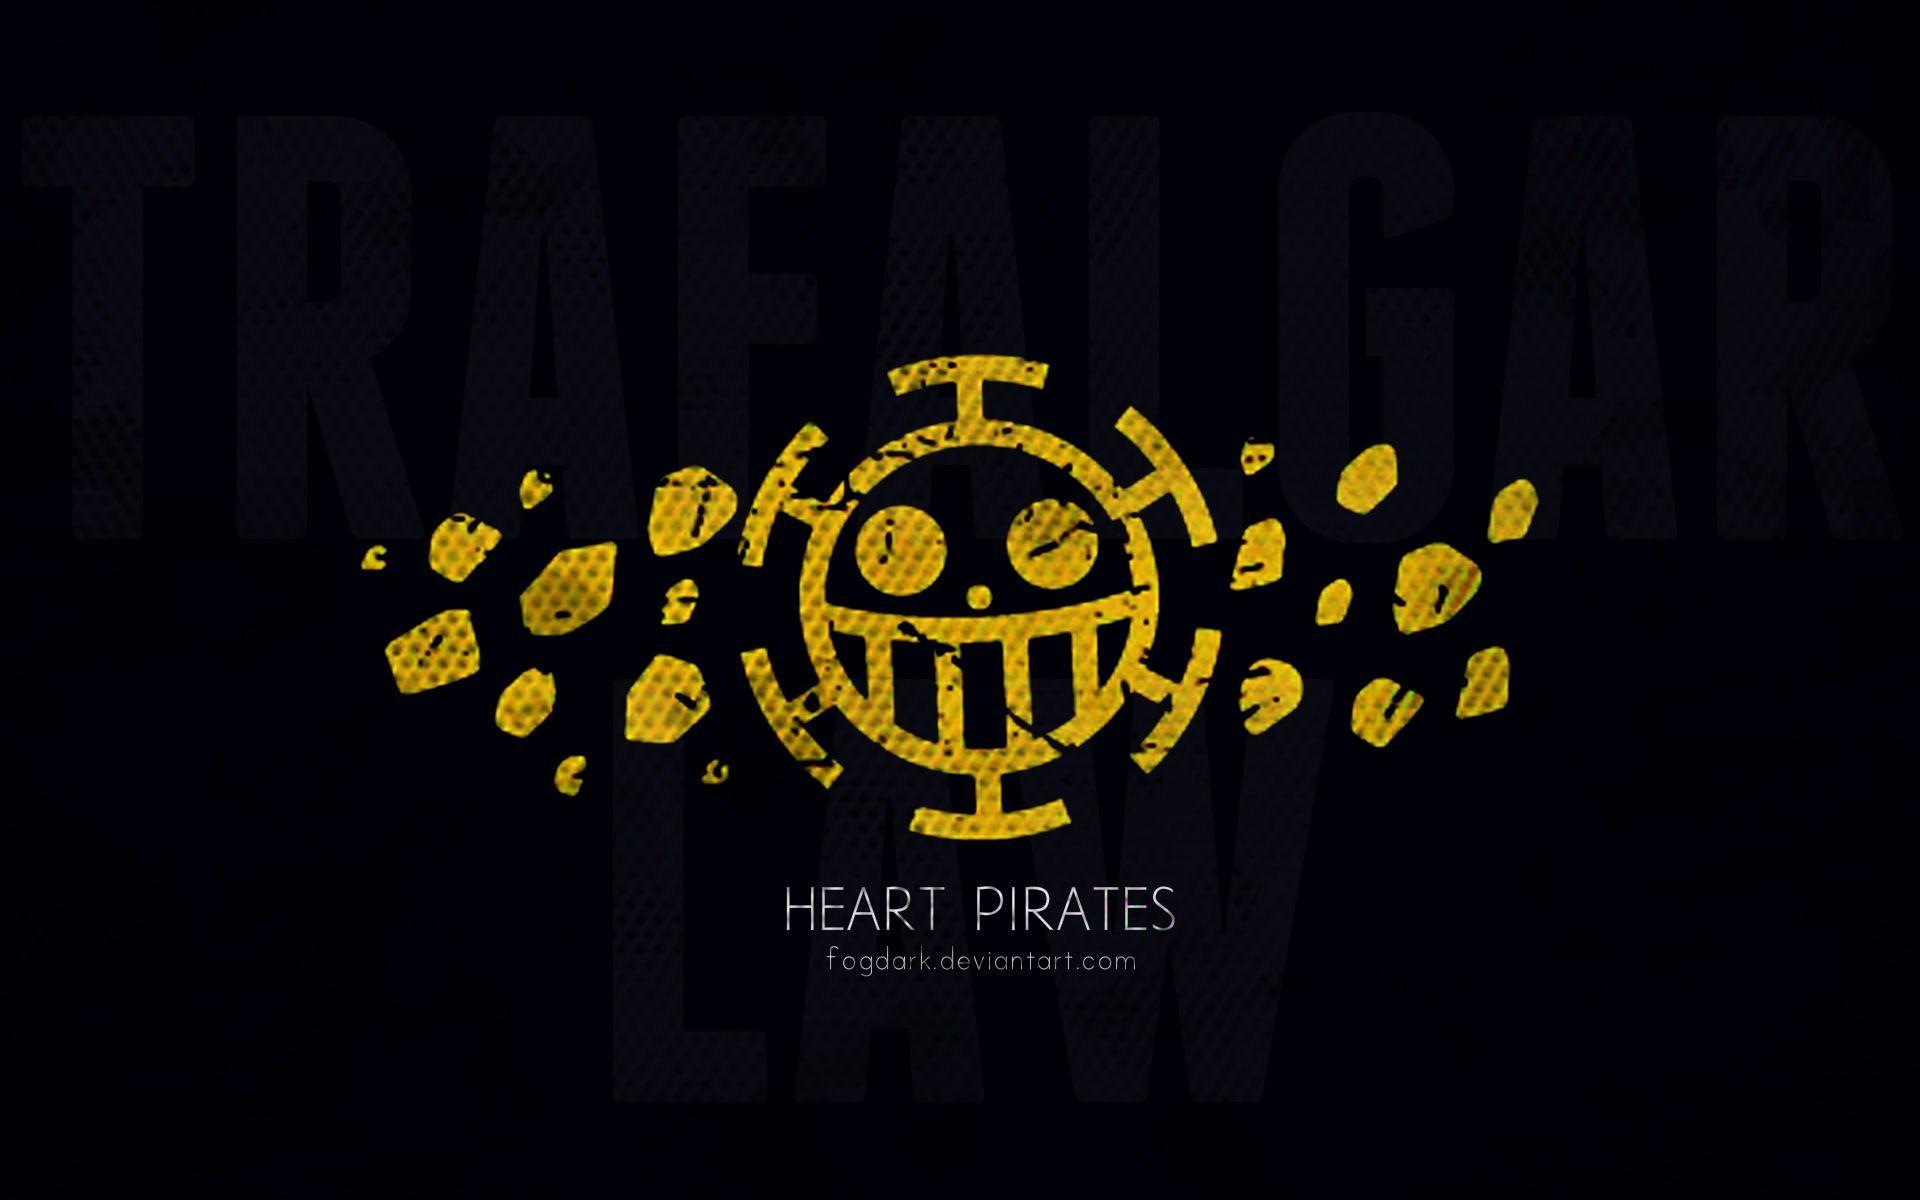 Minimalistic Heart Pirates One Piece Wallpaper by fogdark. Daily